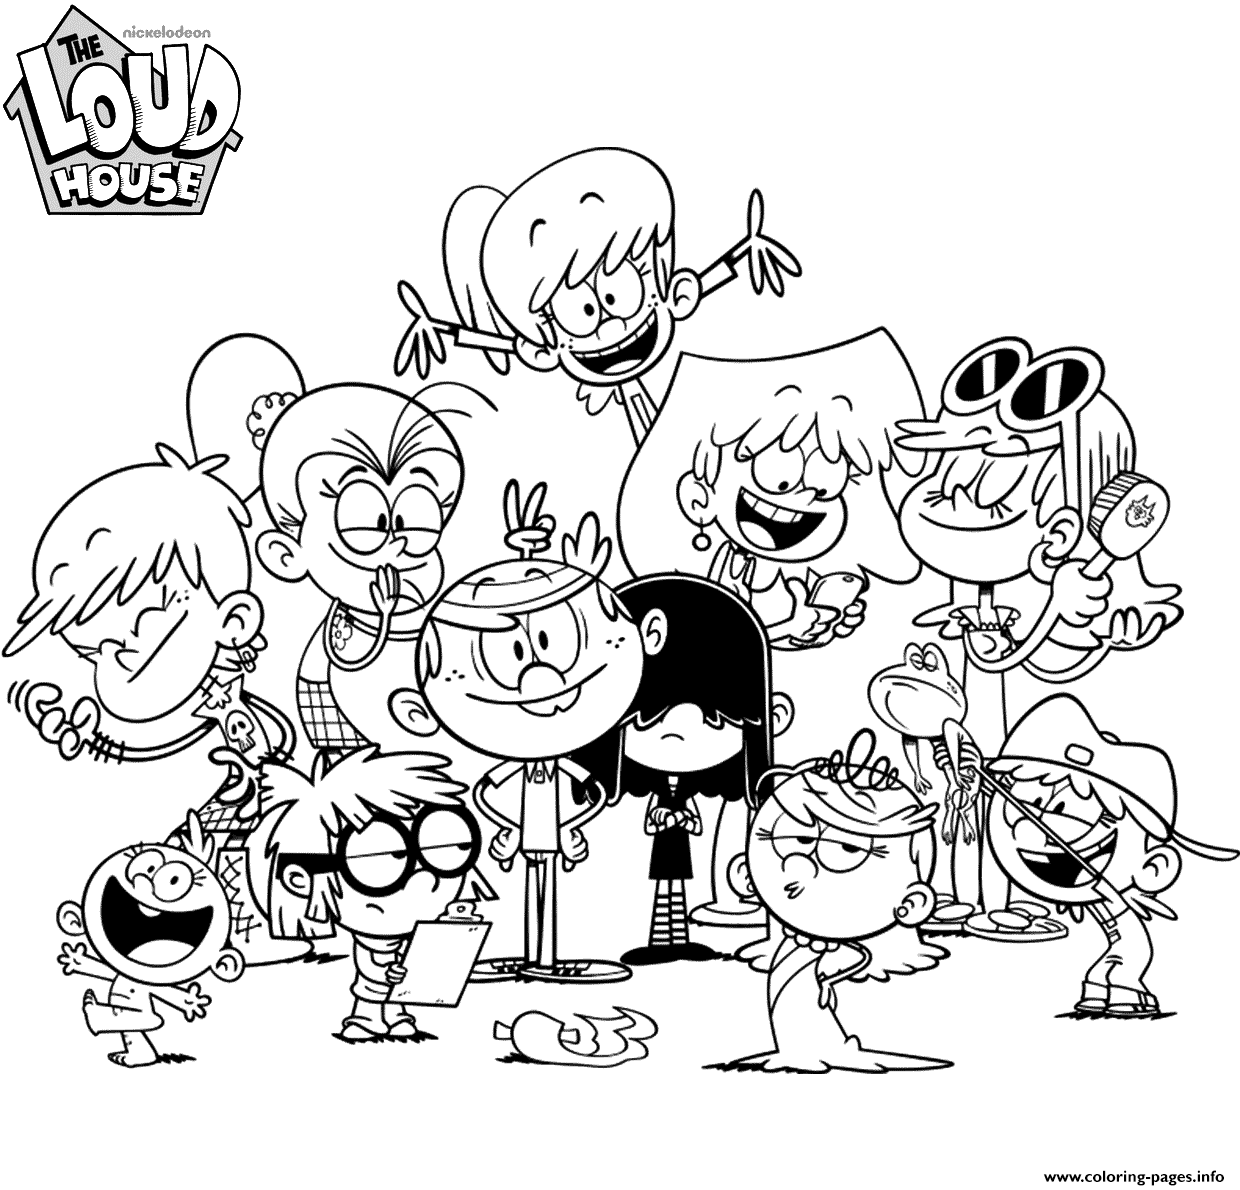 Download Colouring Pages Loud House - KINDERPAGES.COM